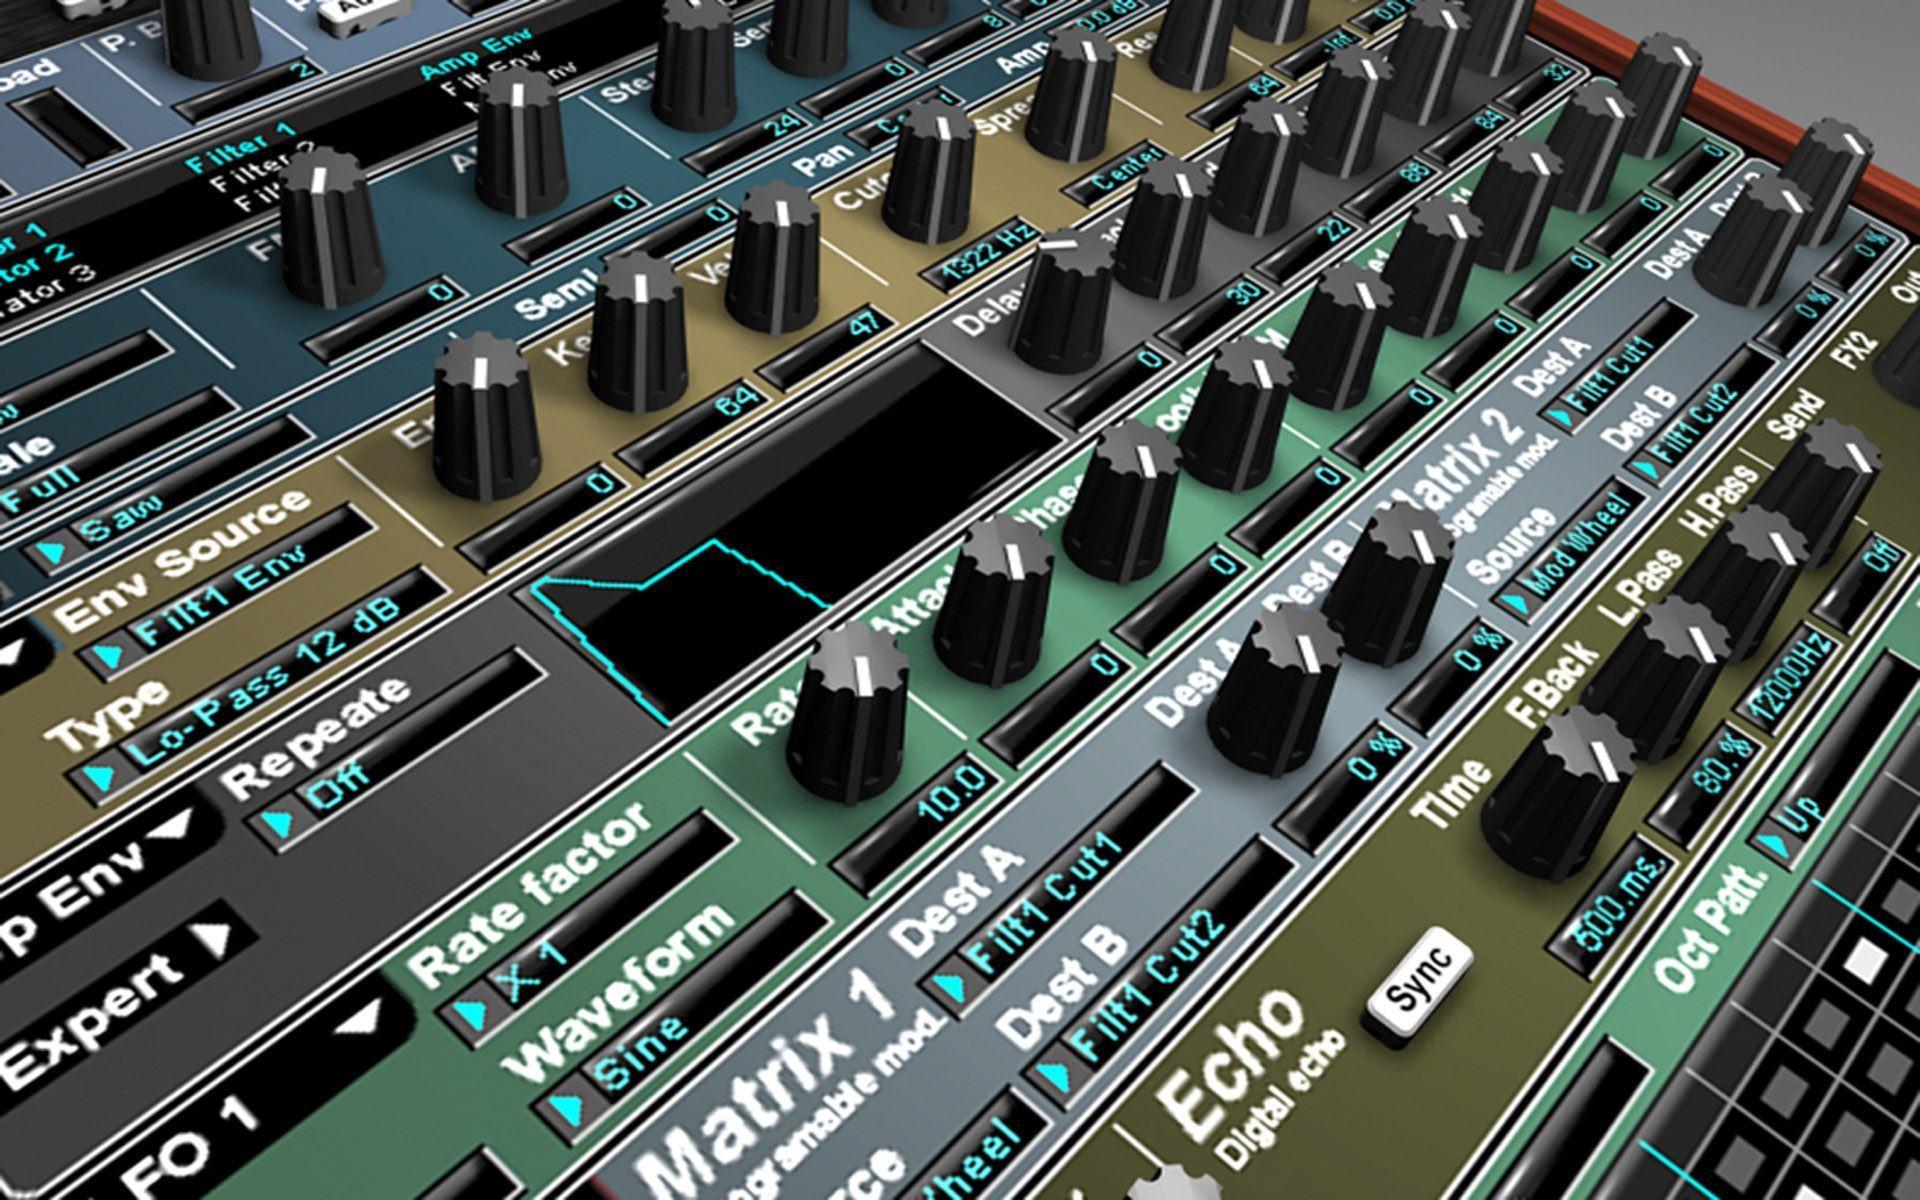 Synthesizer Wallpaper